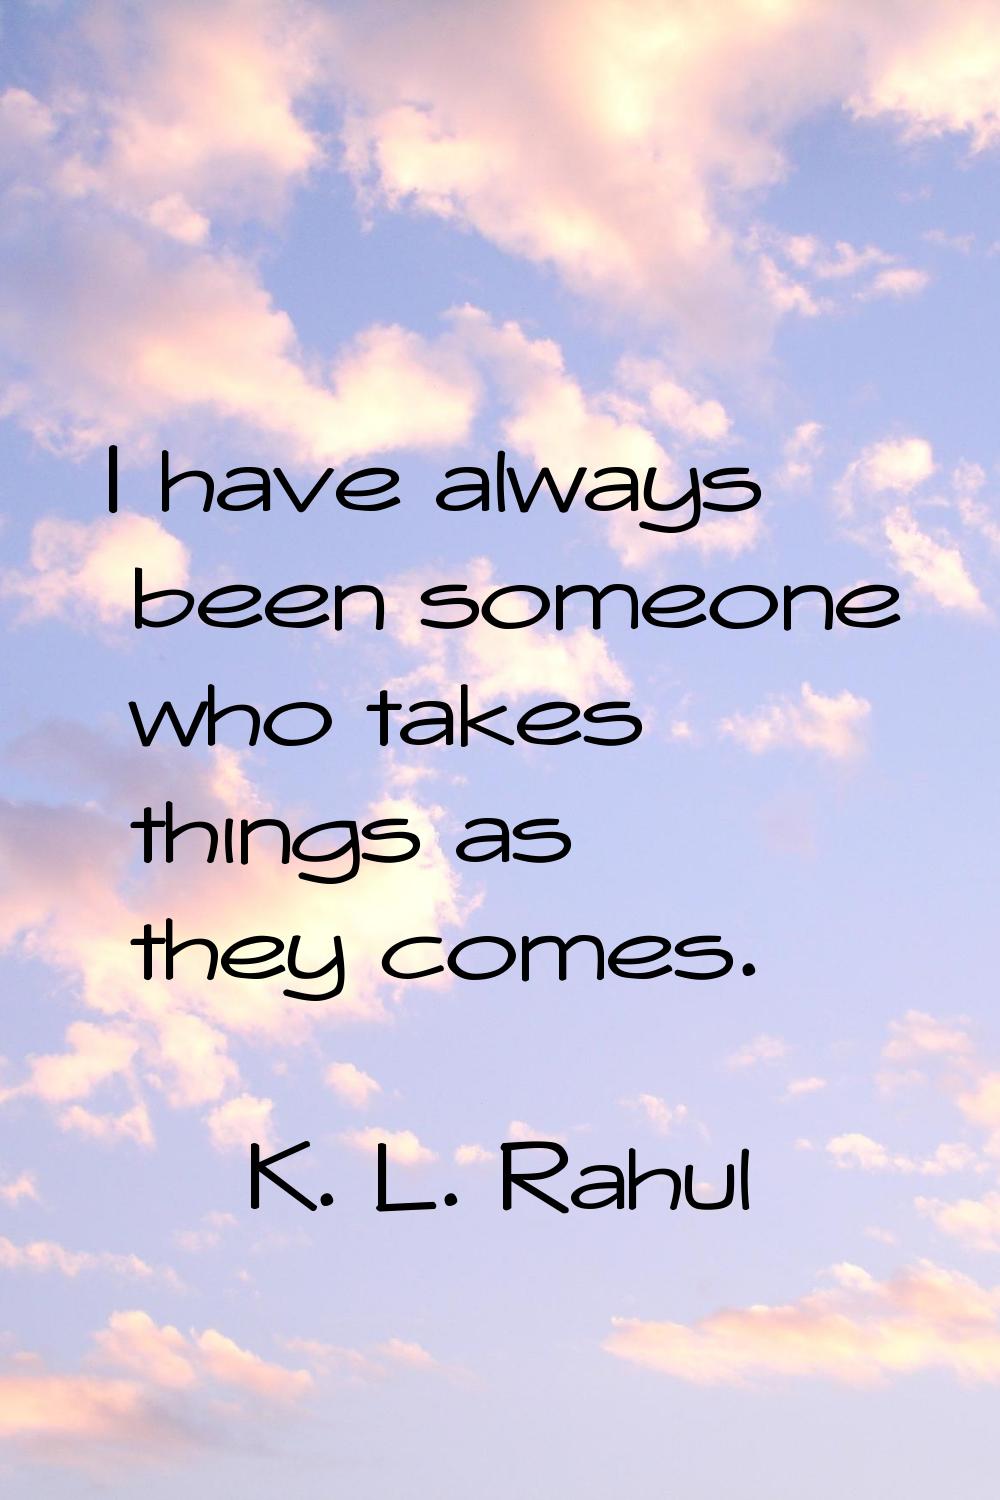 I have always been someone who takes things as they comes.